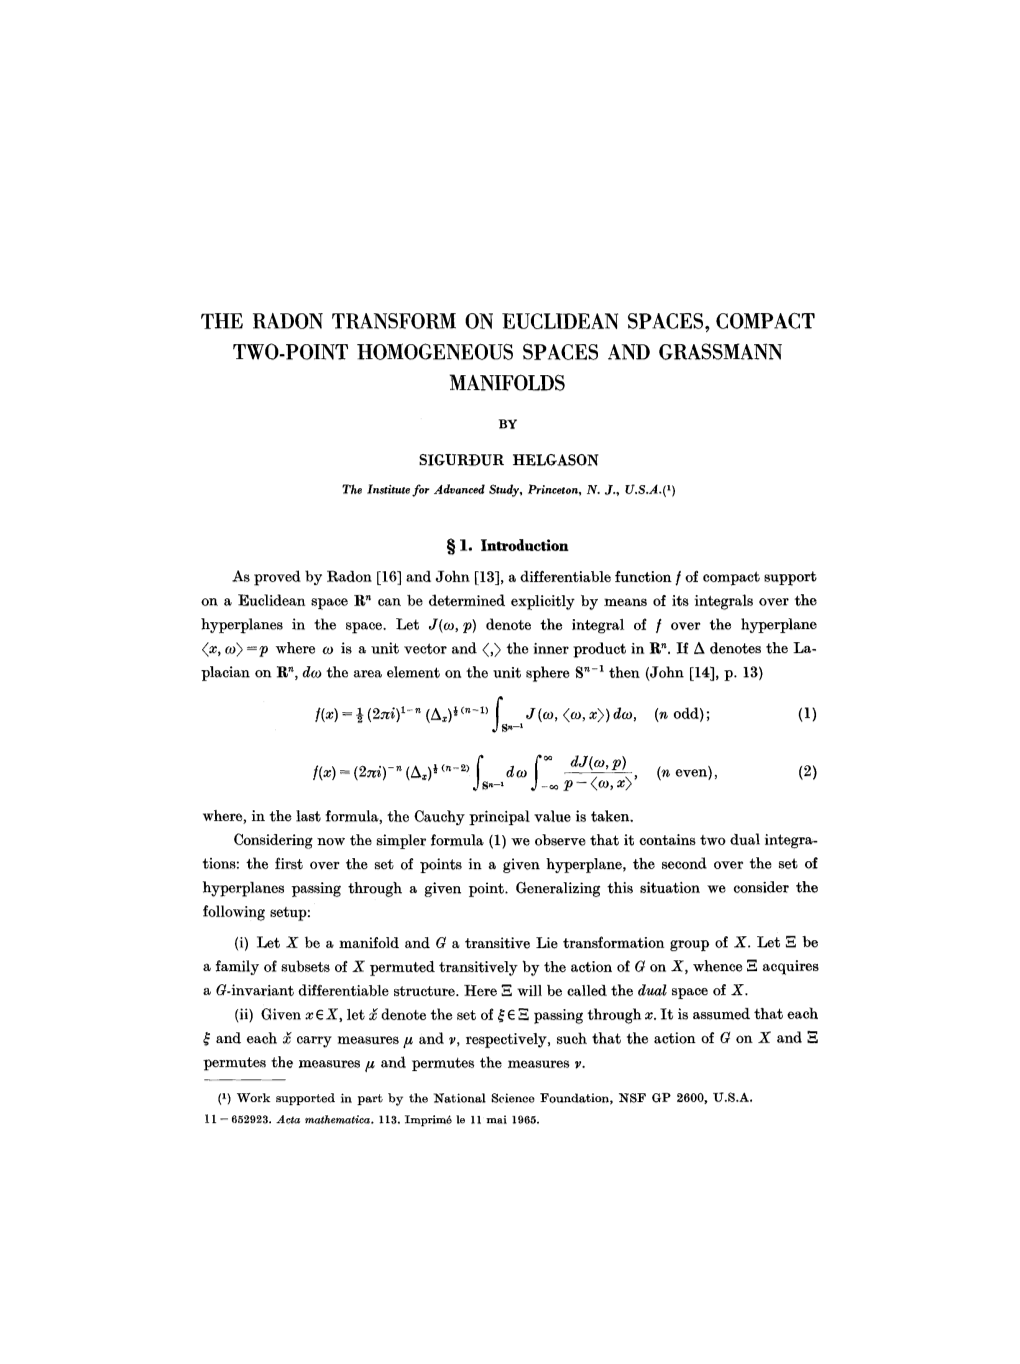 The Radon Transform on Euclidean Spaces, Compact Two-Point Homogeneous Spaces and Grassmann Manifolds